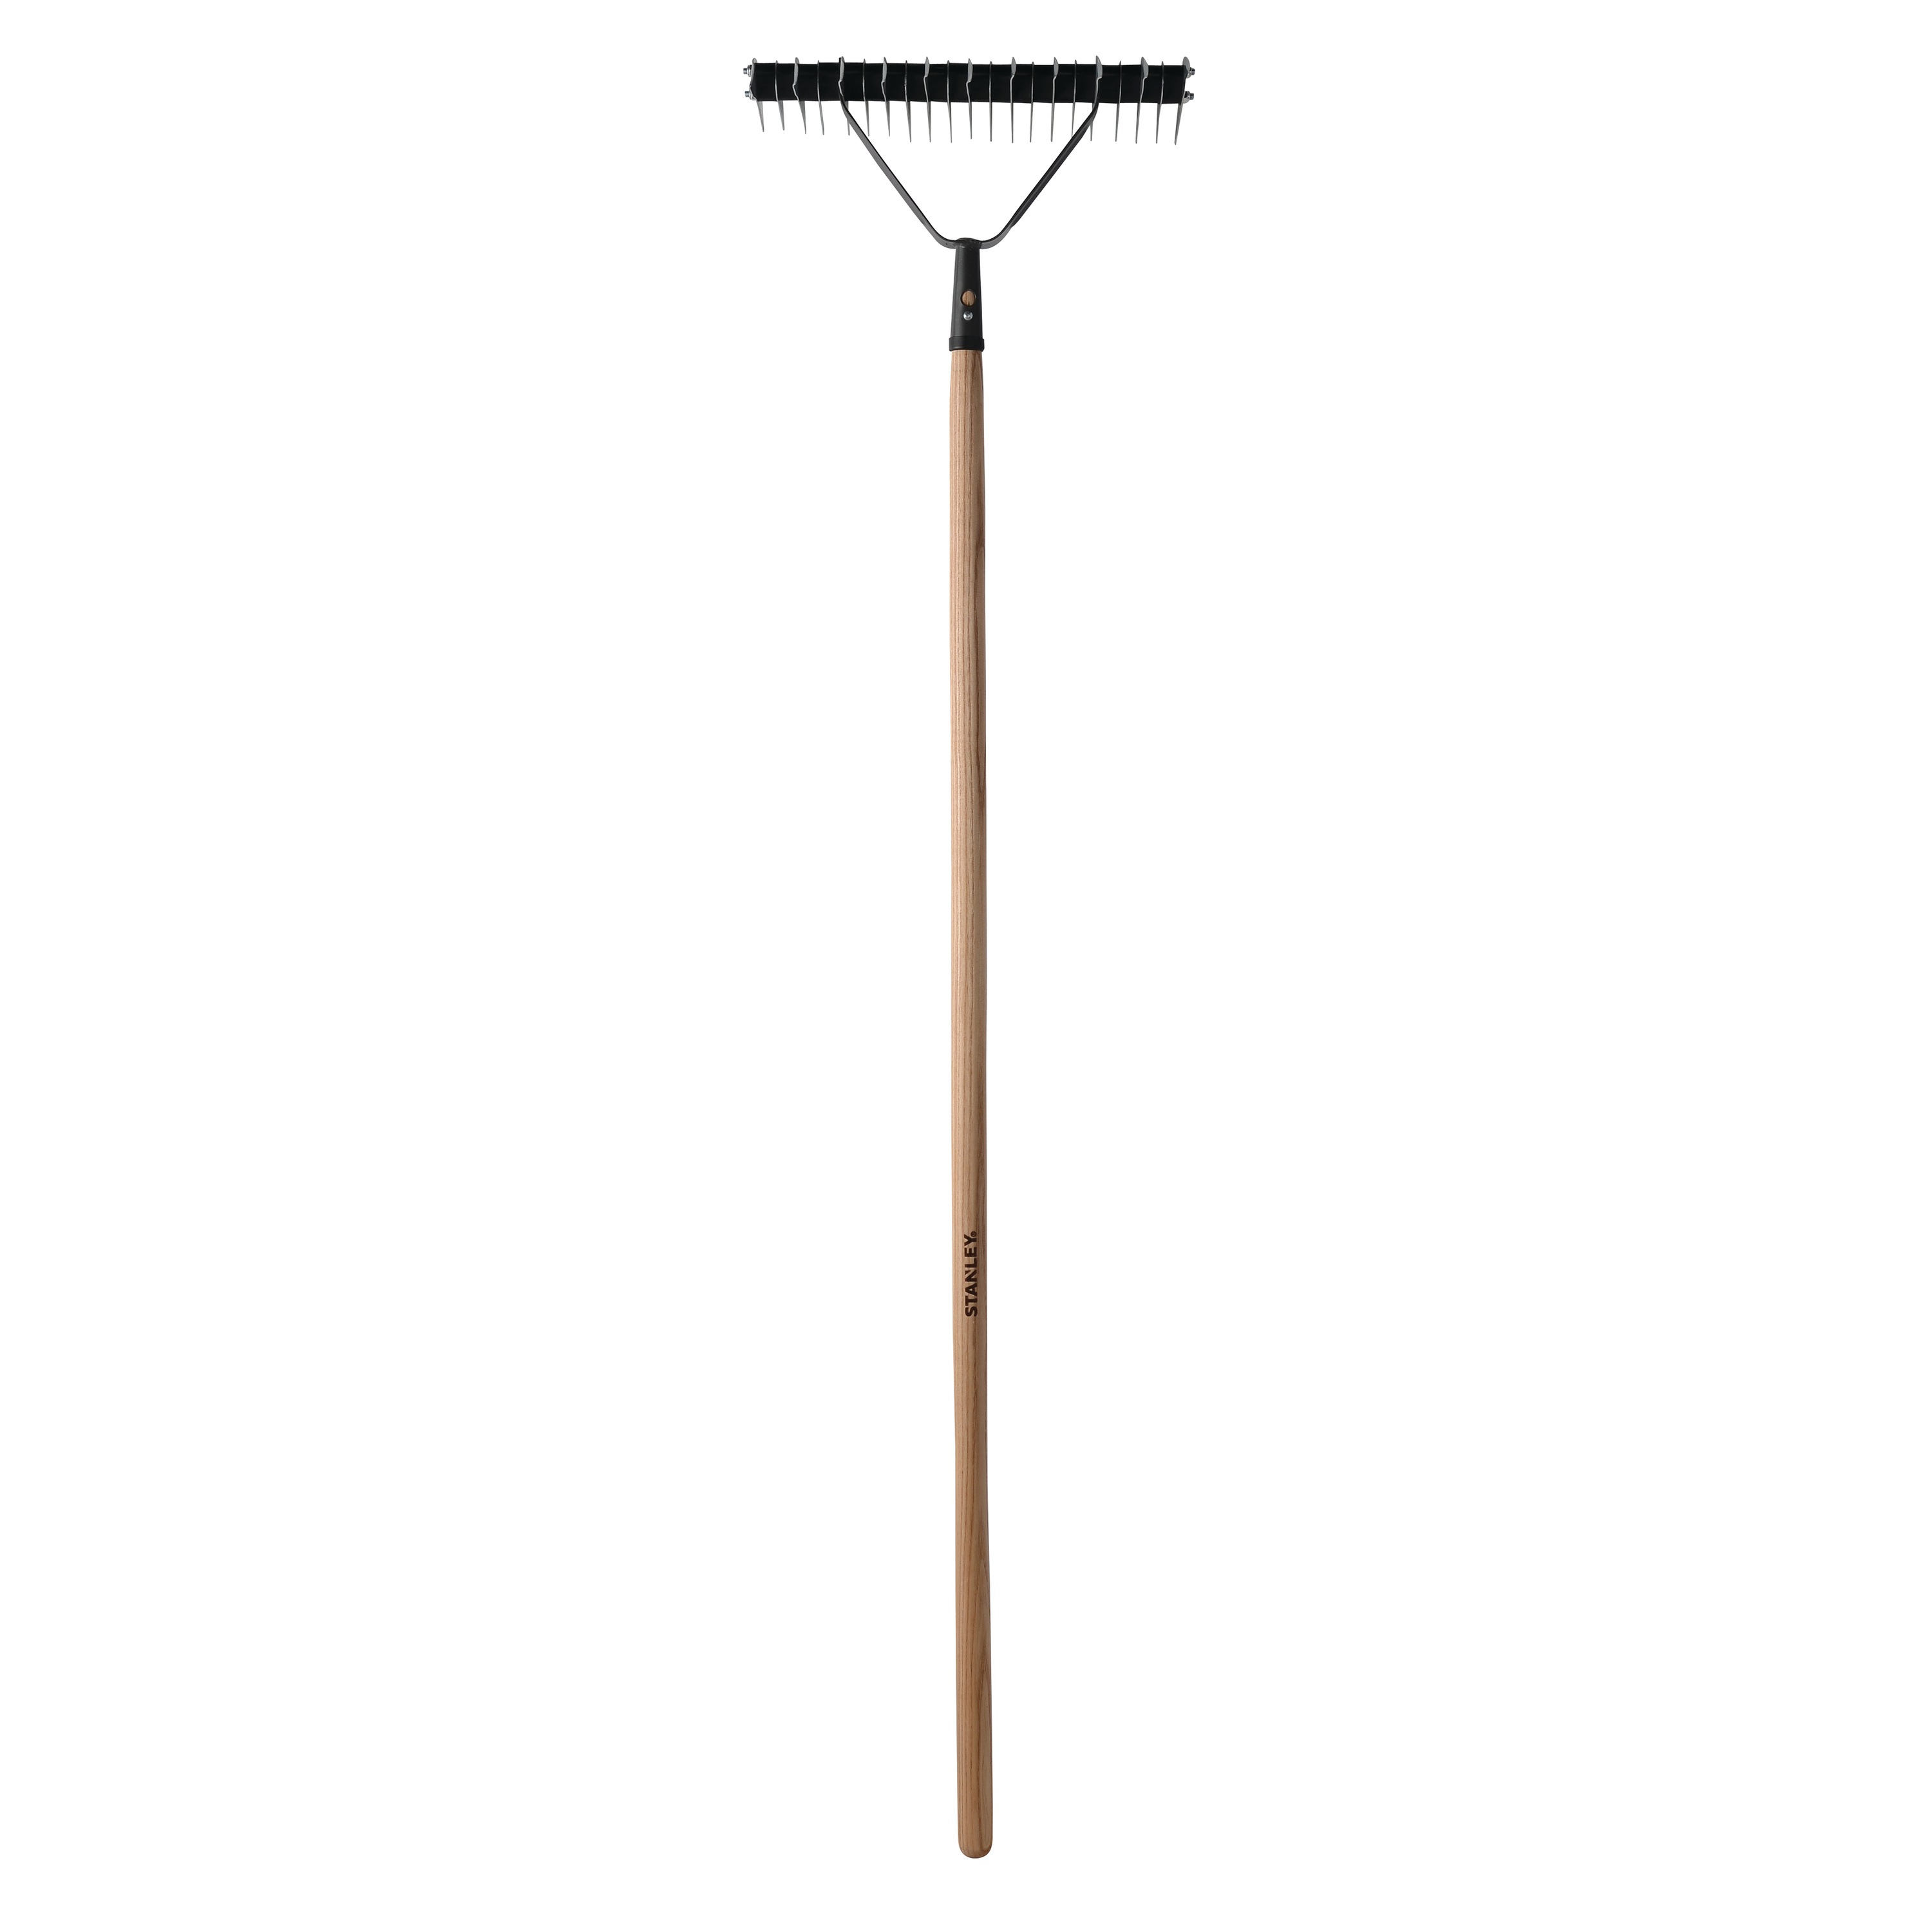 Stanley Tools - ACCUSCAPE ASHWOOD LONG HANDLE THATCHING RAKE - BDS7127